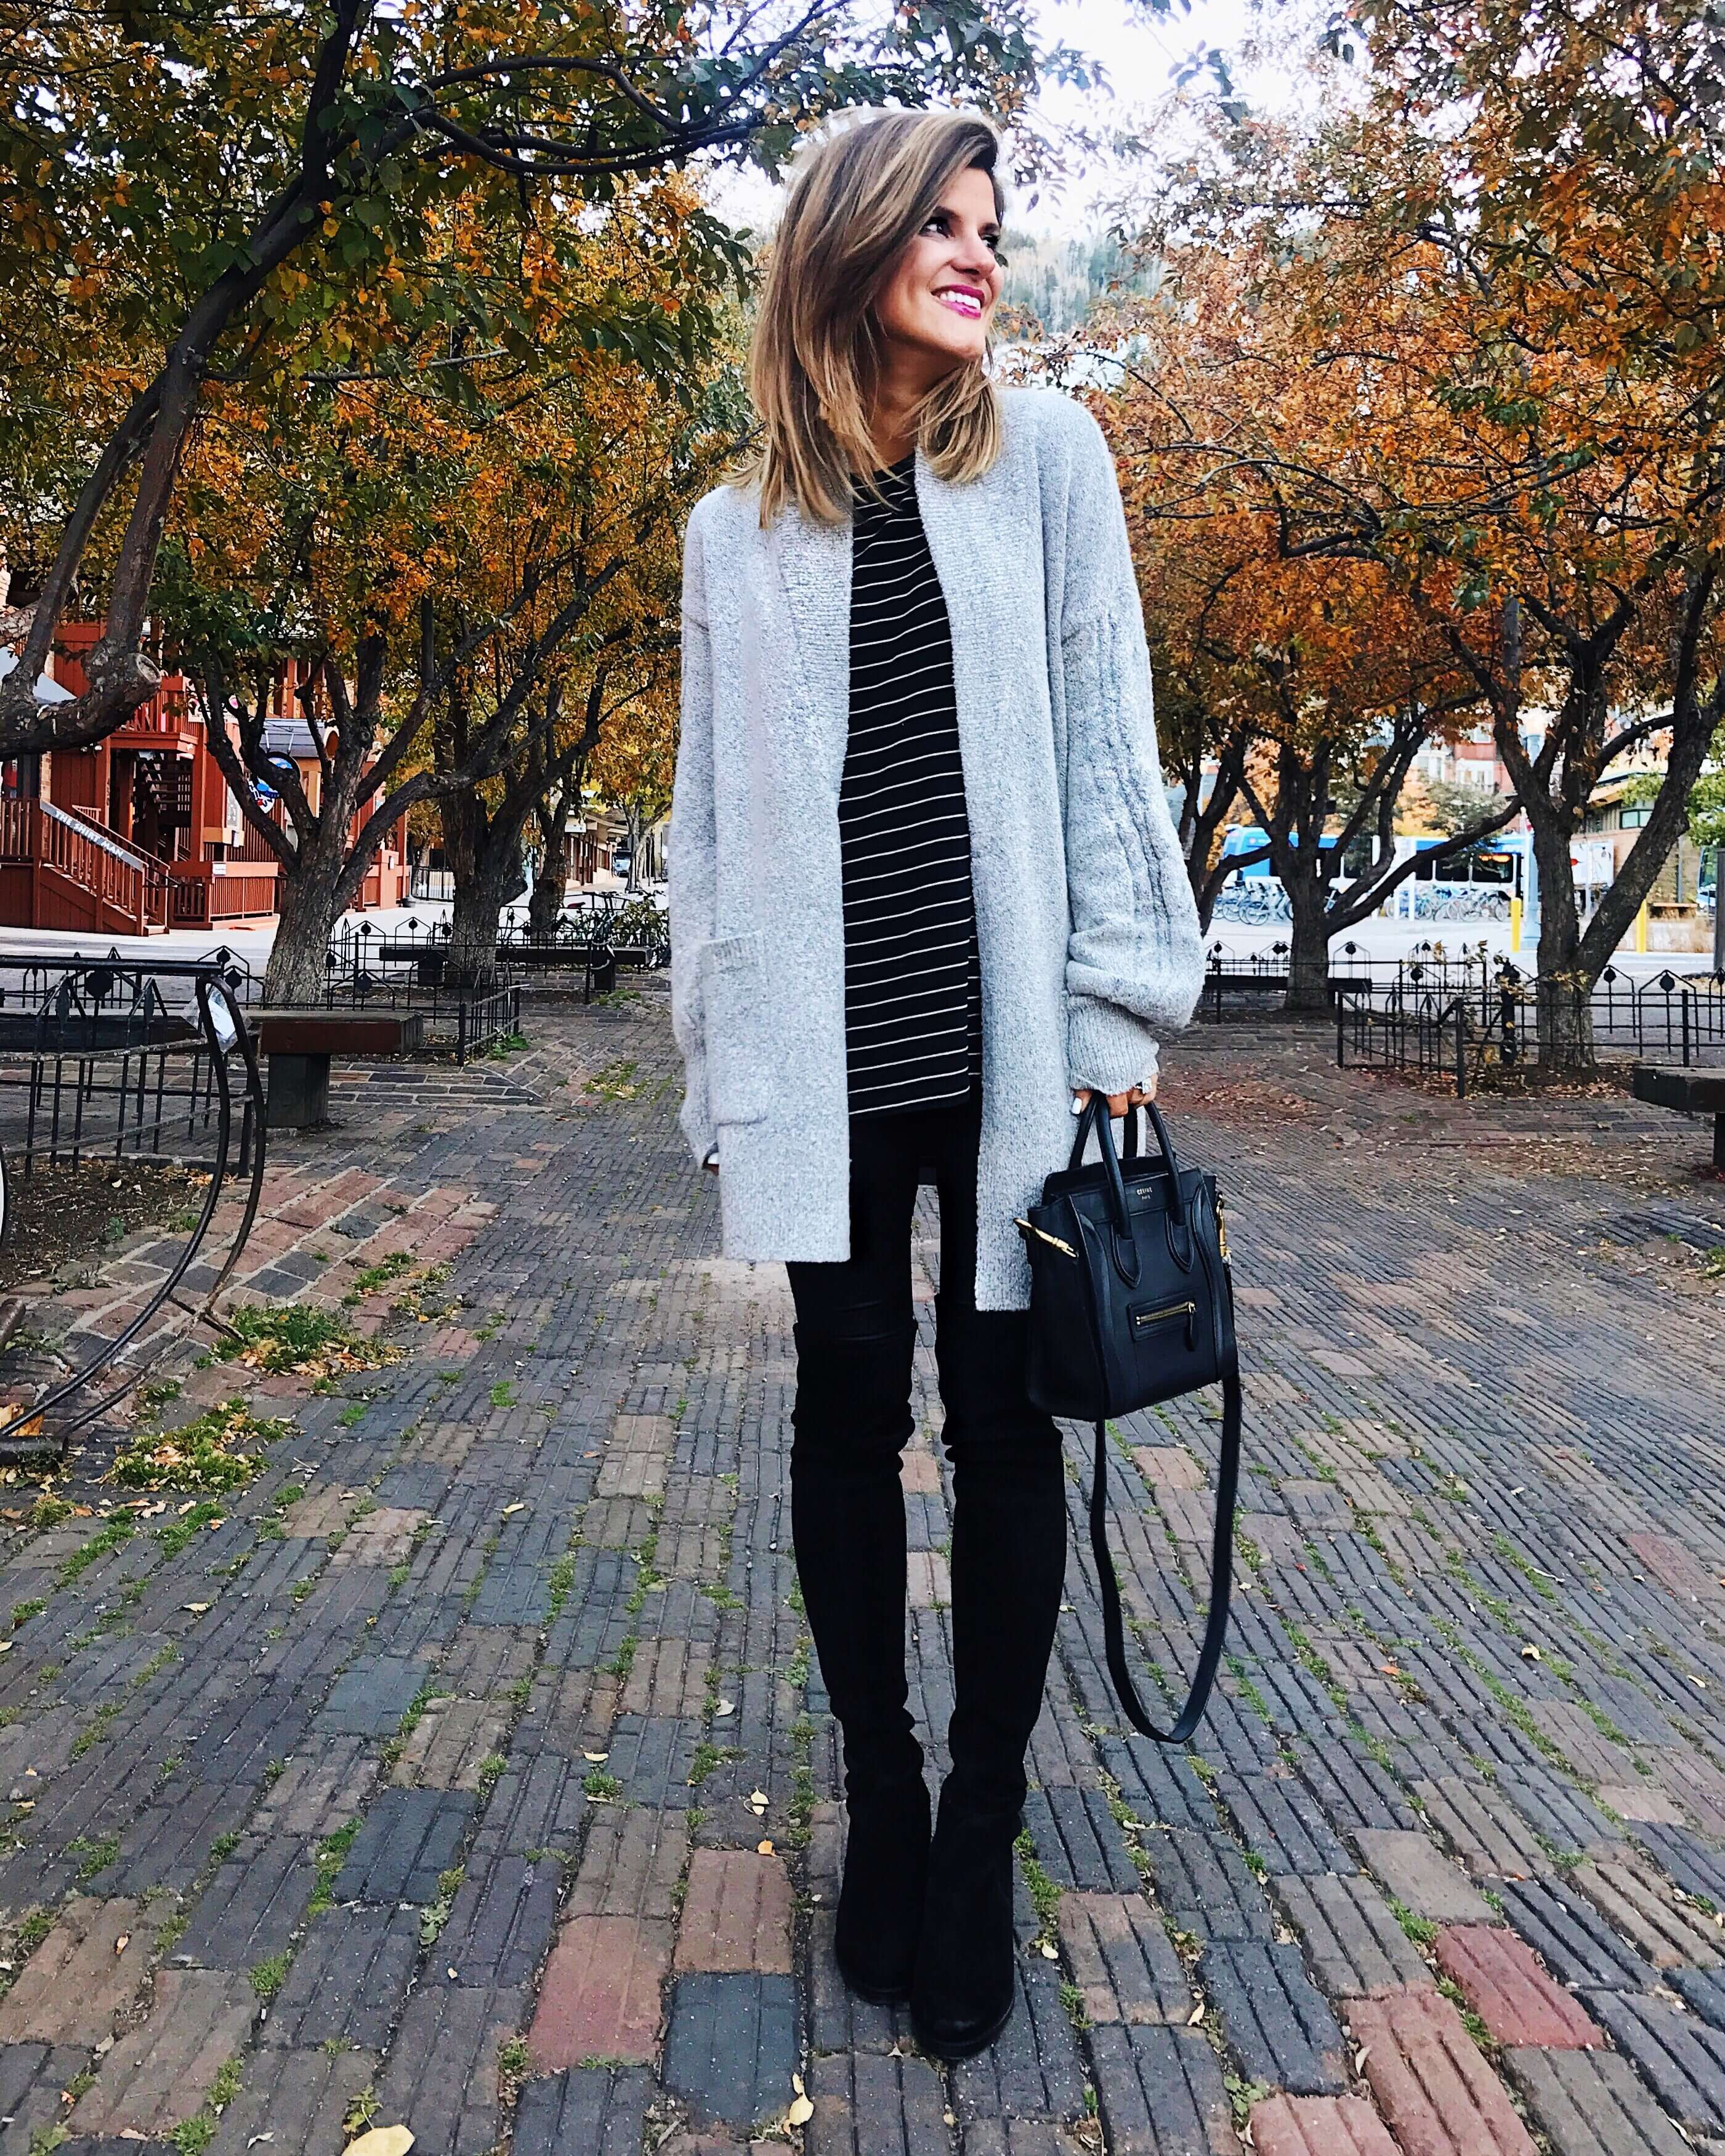 Chic winter outfit ideas